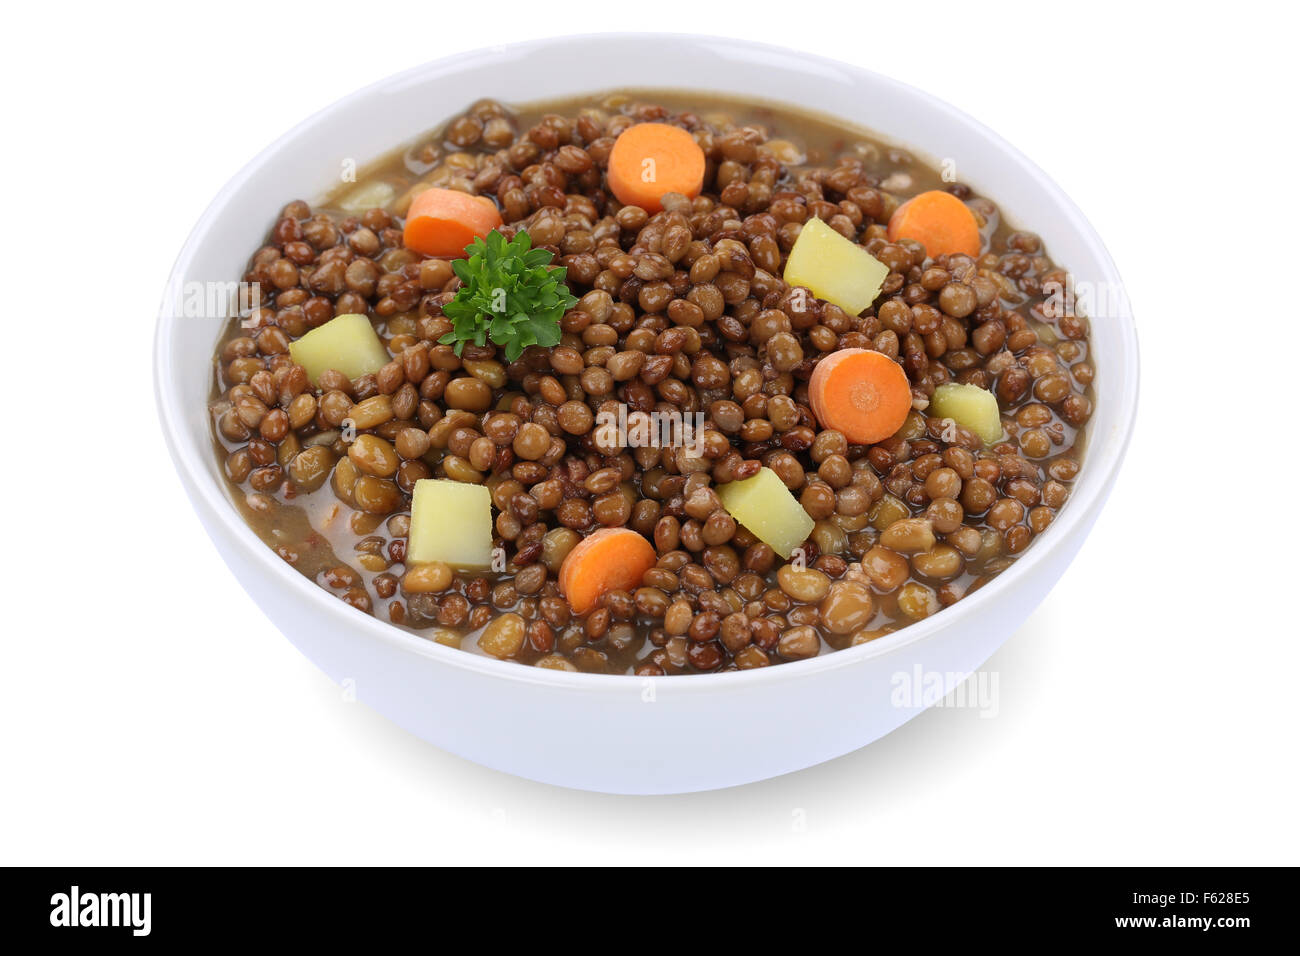 Lentil soup stew meal with lentils in bowl isolated on a white background Stock Photo